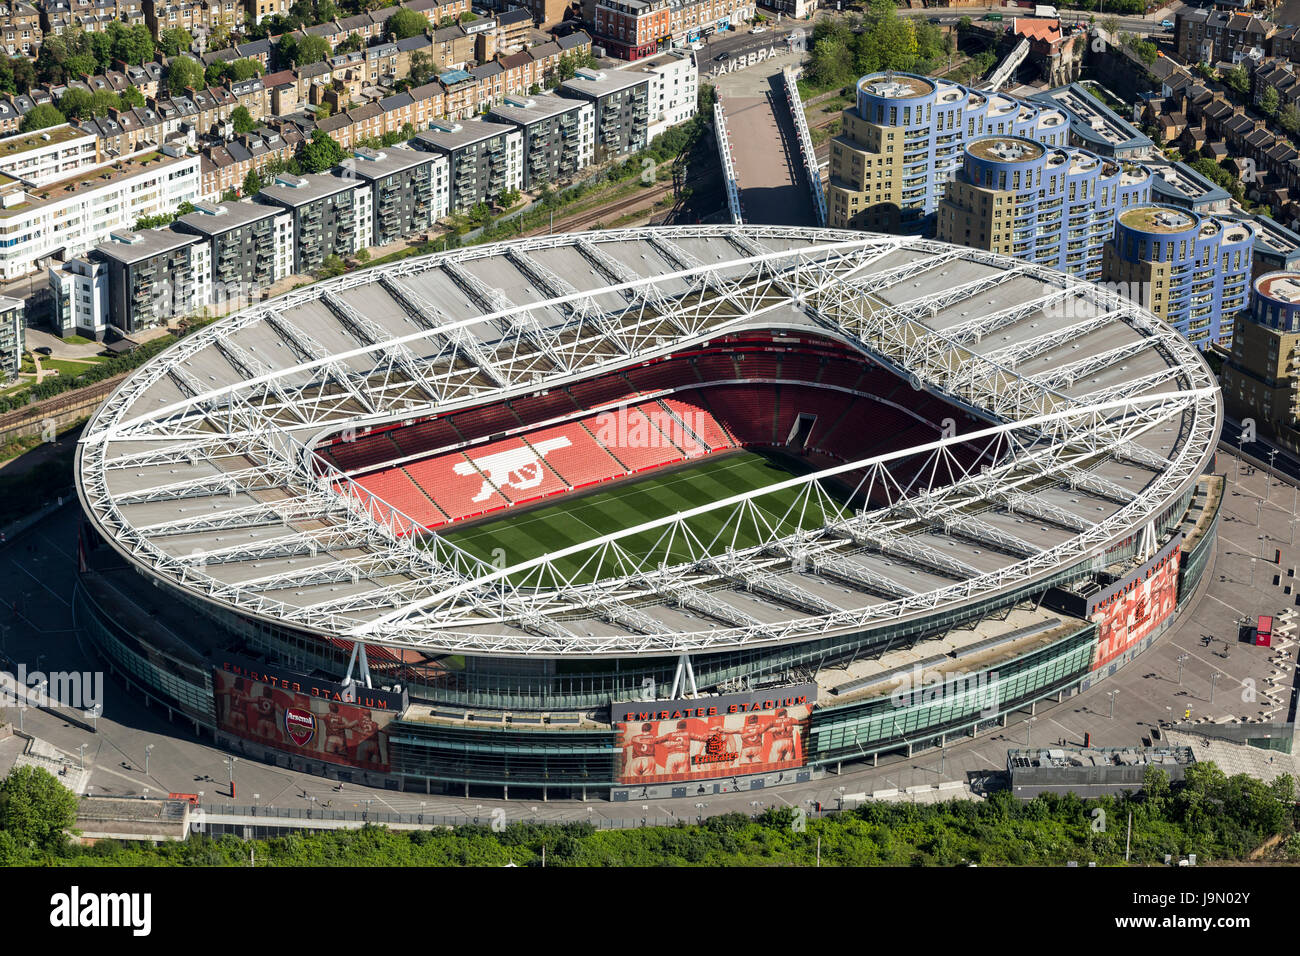 The Emirates Stadium in Highbury, London, England, and the home of the Premier Leagues, Arsenal Football Club. Capacity of over 60,000. Stock Photo